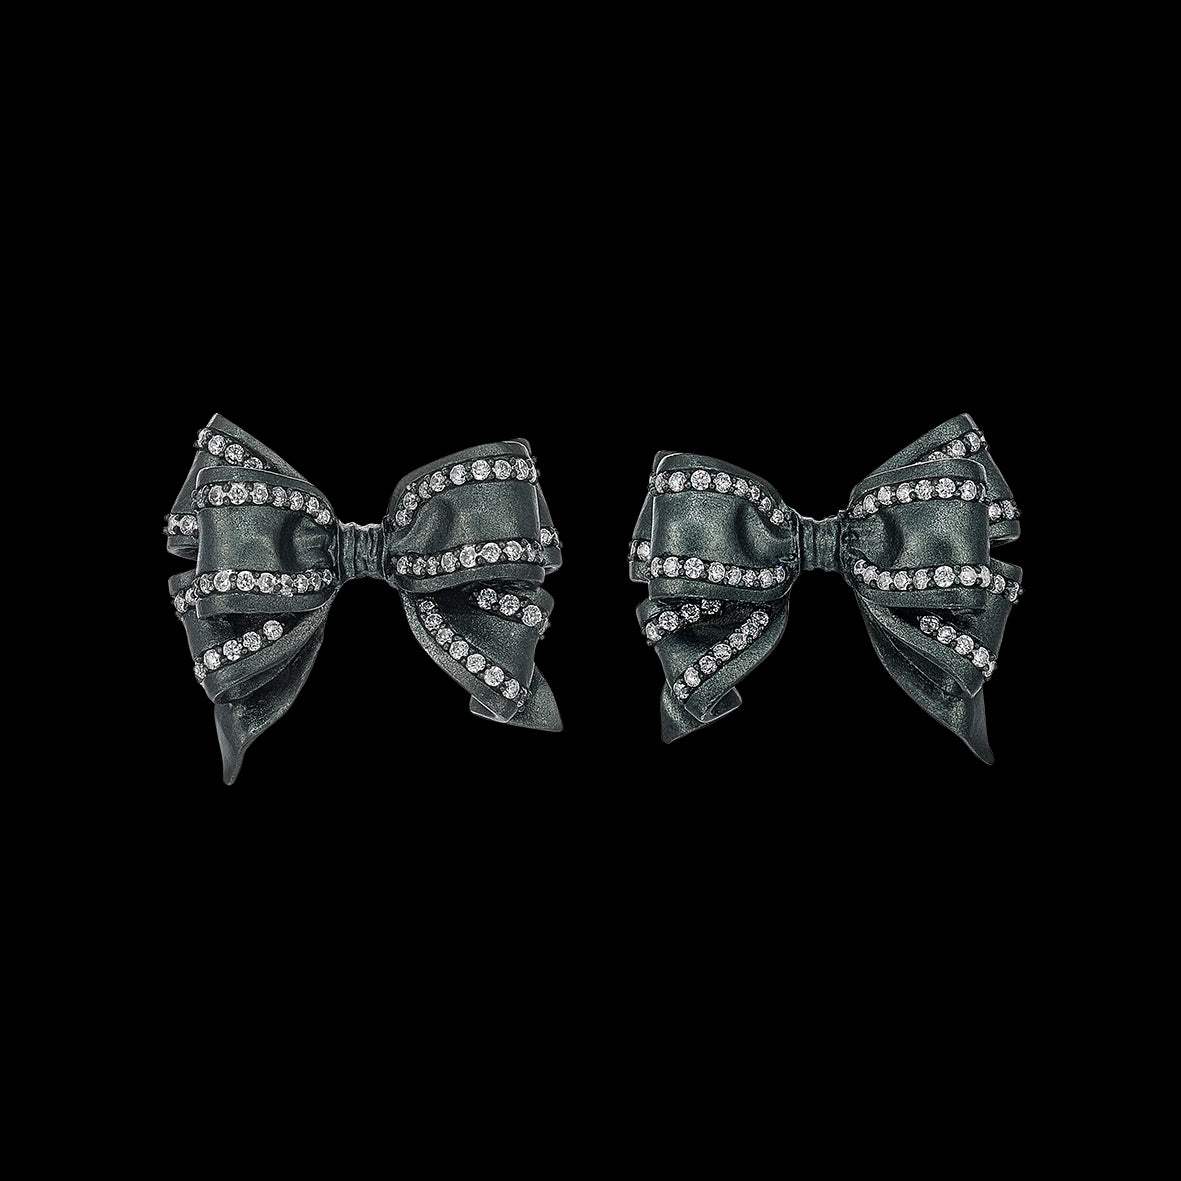 Mini Black Bow Tie Earrings, Earring, Anabela Chan Joaillerie - Fine jewelry with laboratory grown and created gemstones hand-crafted in the United Kingdom. Anabela Chan Joaillerie is the first fine jewellery brand in the world to champion laboratory-grown and created gemstones with high jewellery design, artisanal craftsmanship and a focus on ethical and sustainable innovations.